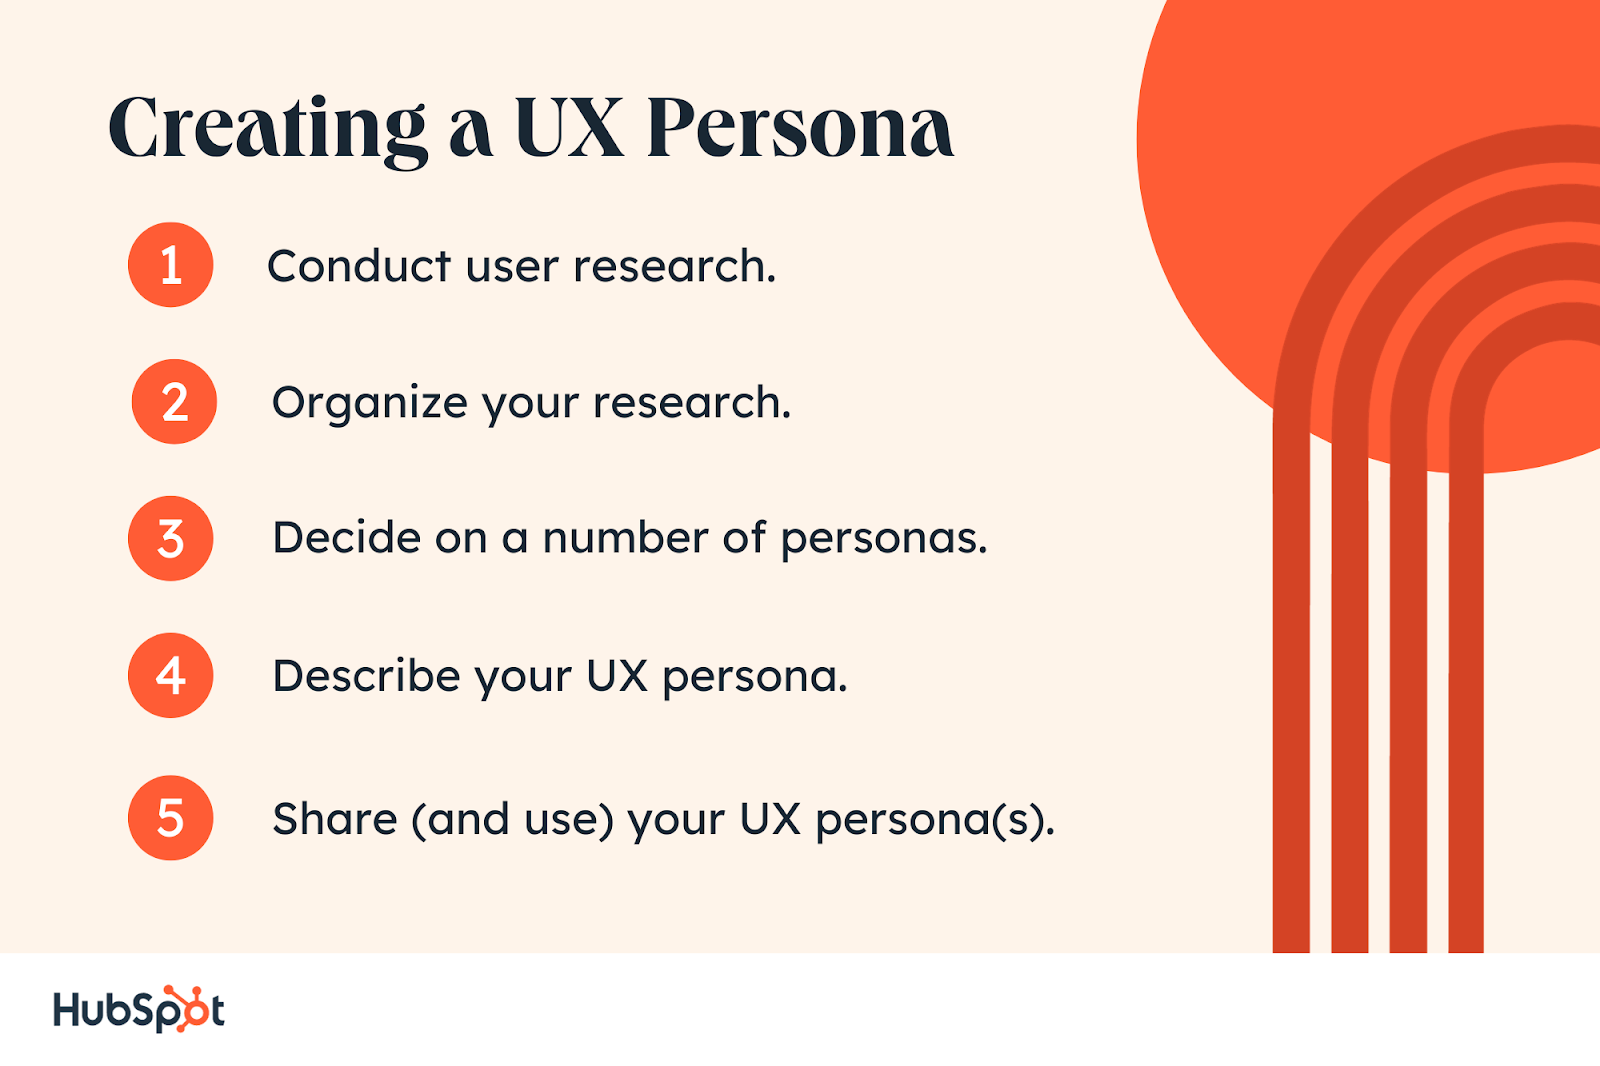 Creating a UX Persona. Conduct user research. Organize your research. Decide on a number of personas. Describe your UX persona. Share (and use) your UX persona(s).